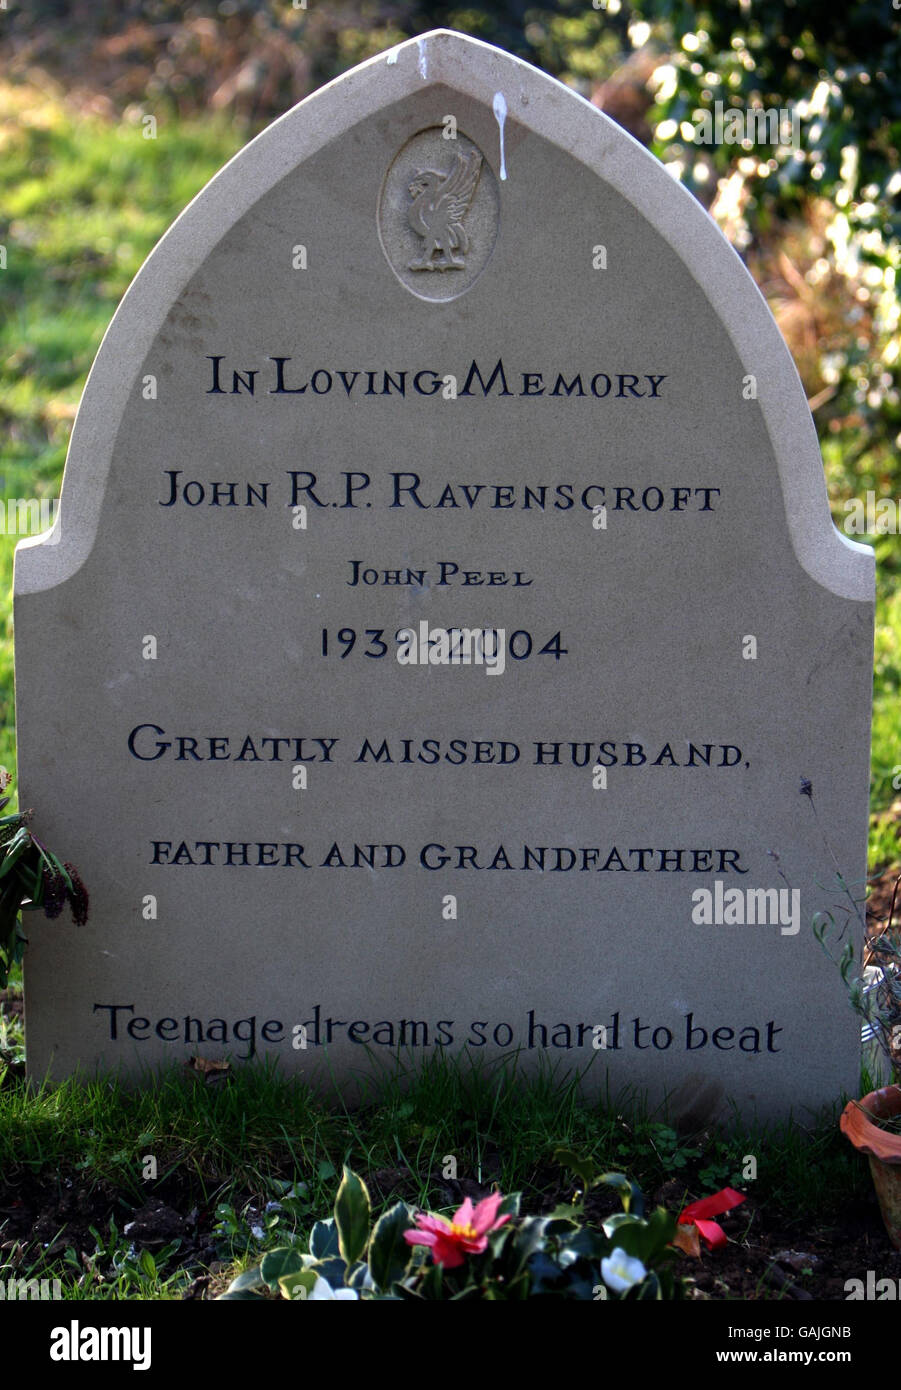 The headstone of legendary DJ John Peel recently erected and engraved with the song lyric 'Teenage dreams so hard to beat' from the Undertones 1978 hit Teenage Kicks, in the grave yard of St Andrews Church, in Great Finborough, near his former home in Suffolk. Stock Photo